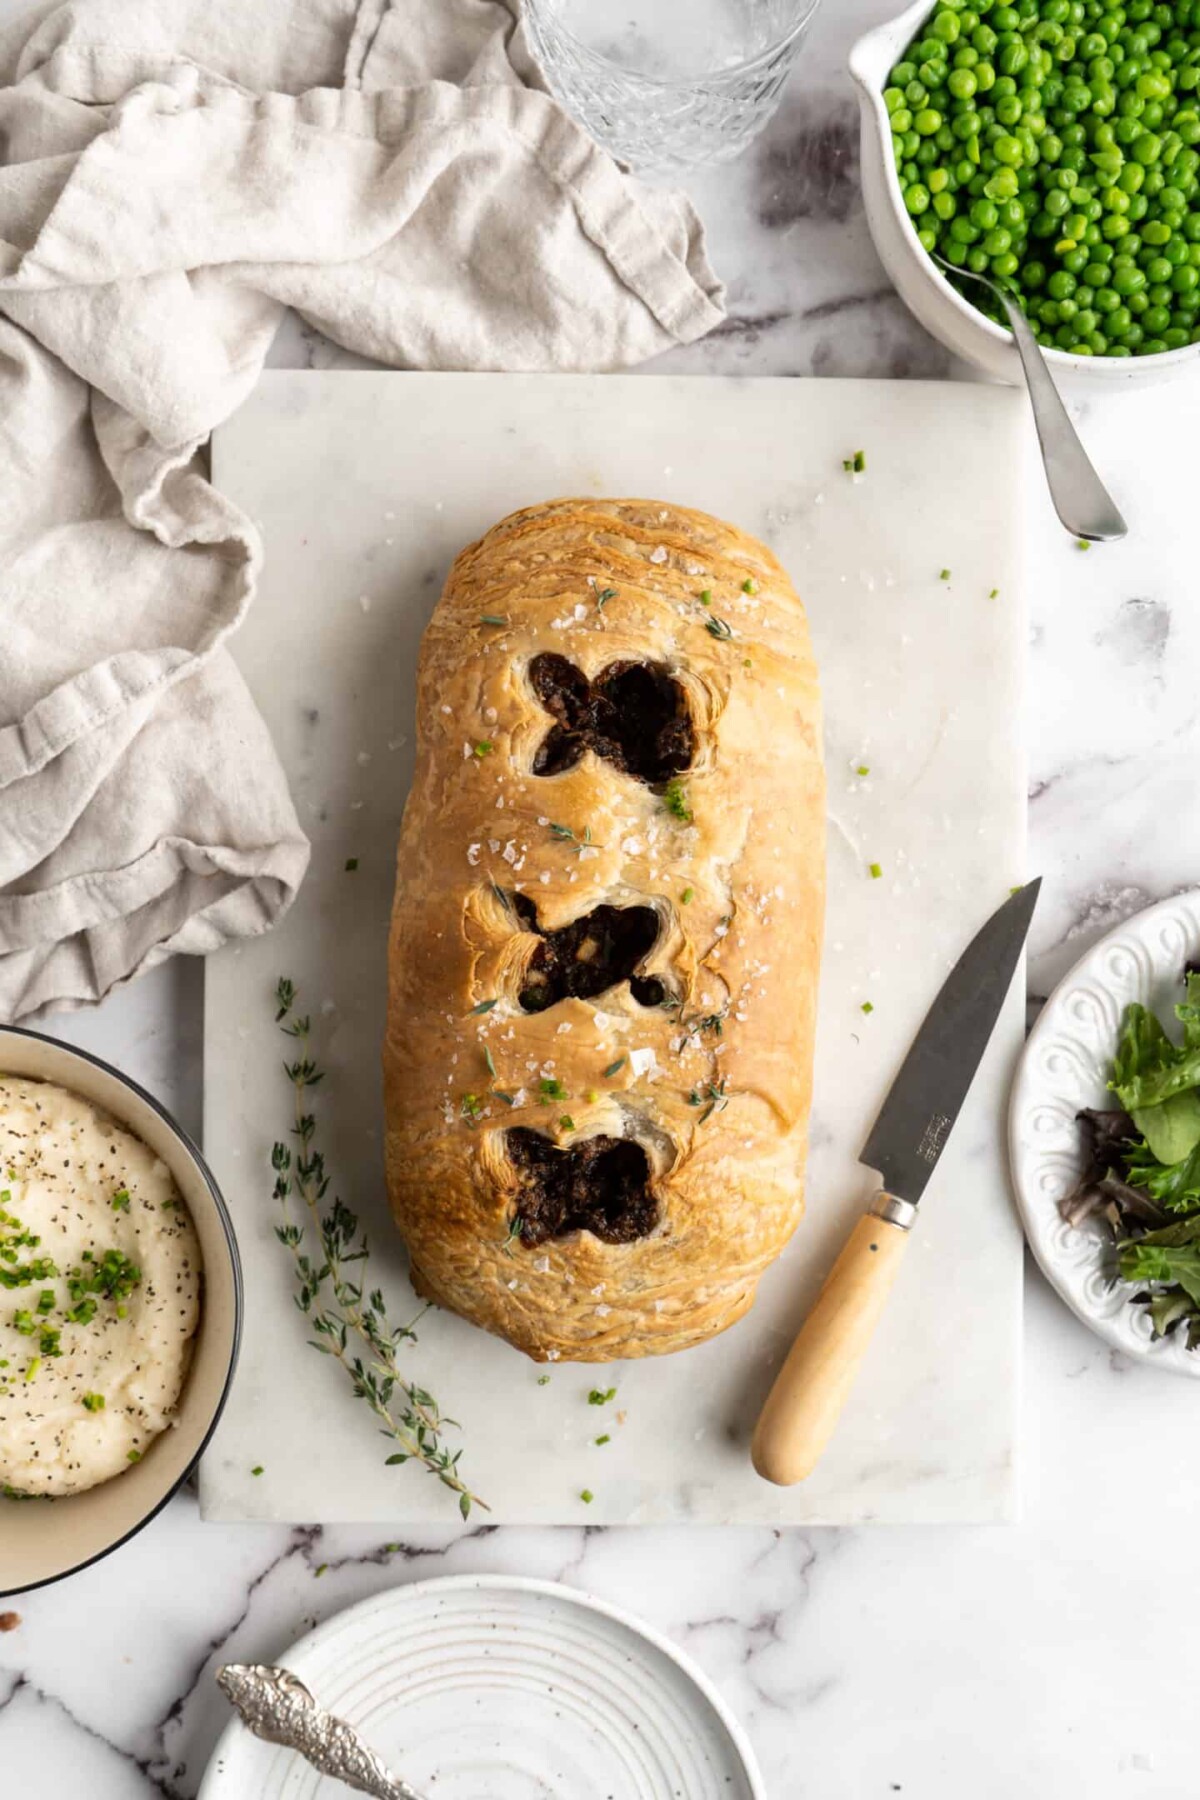 A vegan wellington with scores on the top, on a cutting board next to a paring knife and fresh thyme sprigs, a kitchen towel, a bowl of mashed potatoes, a bowl of peas, and a plate of greens